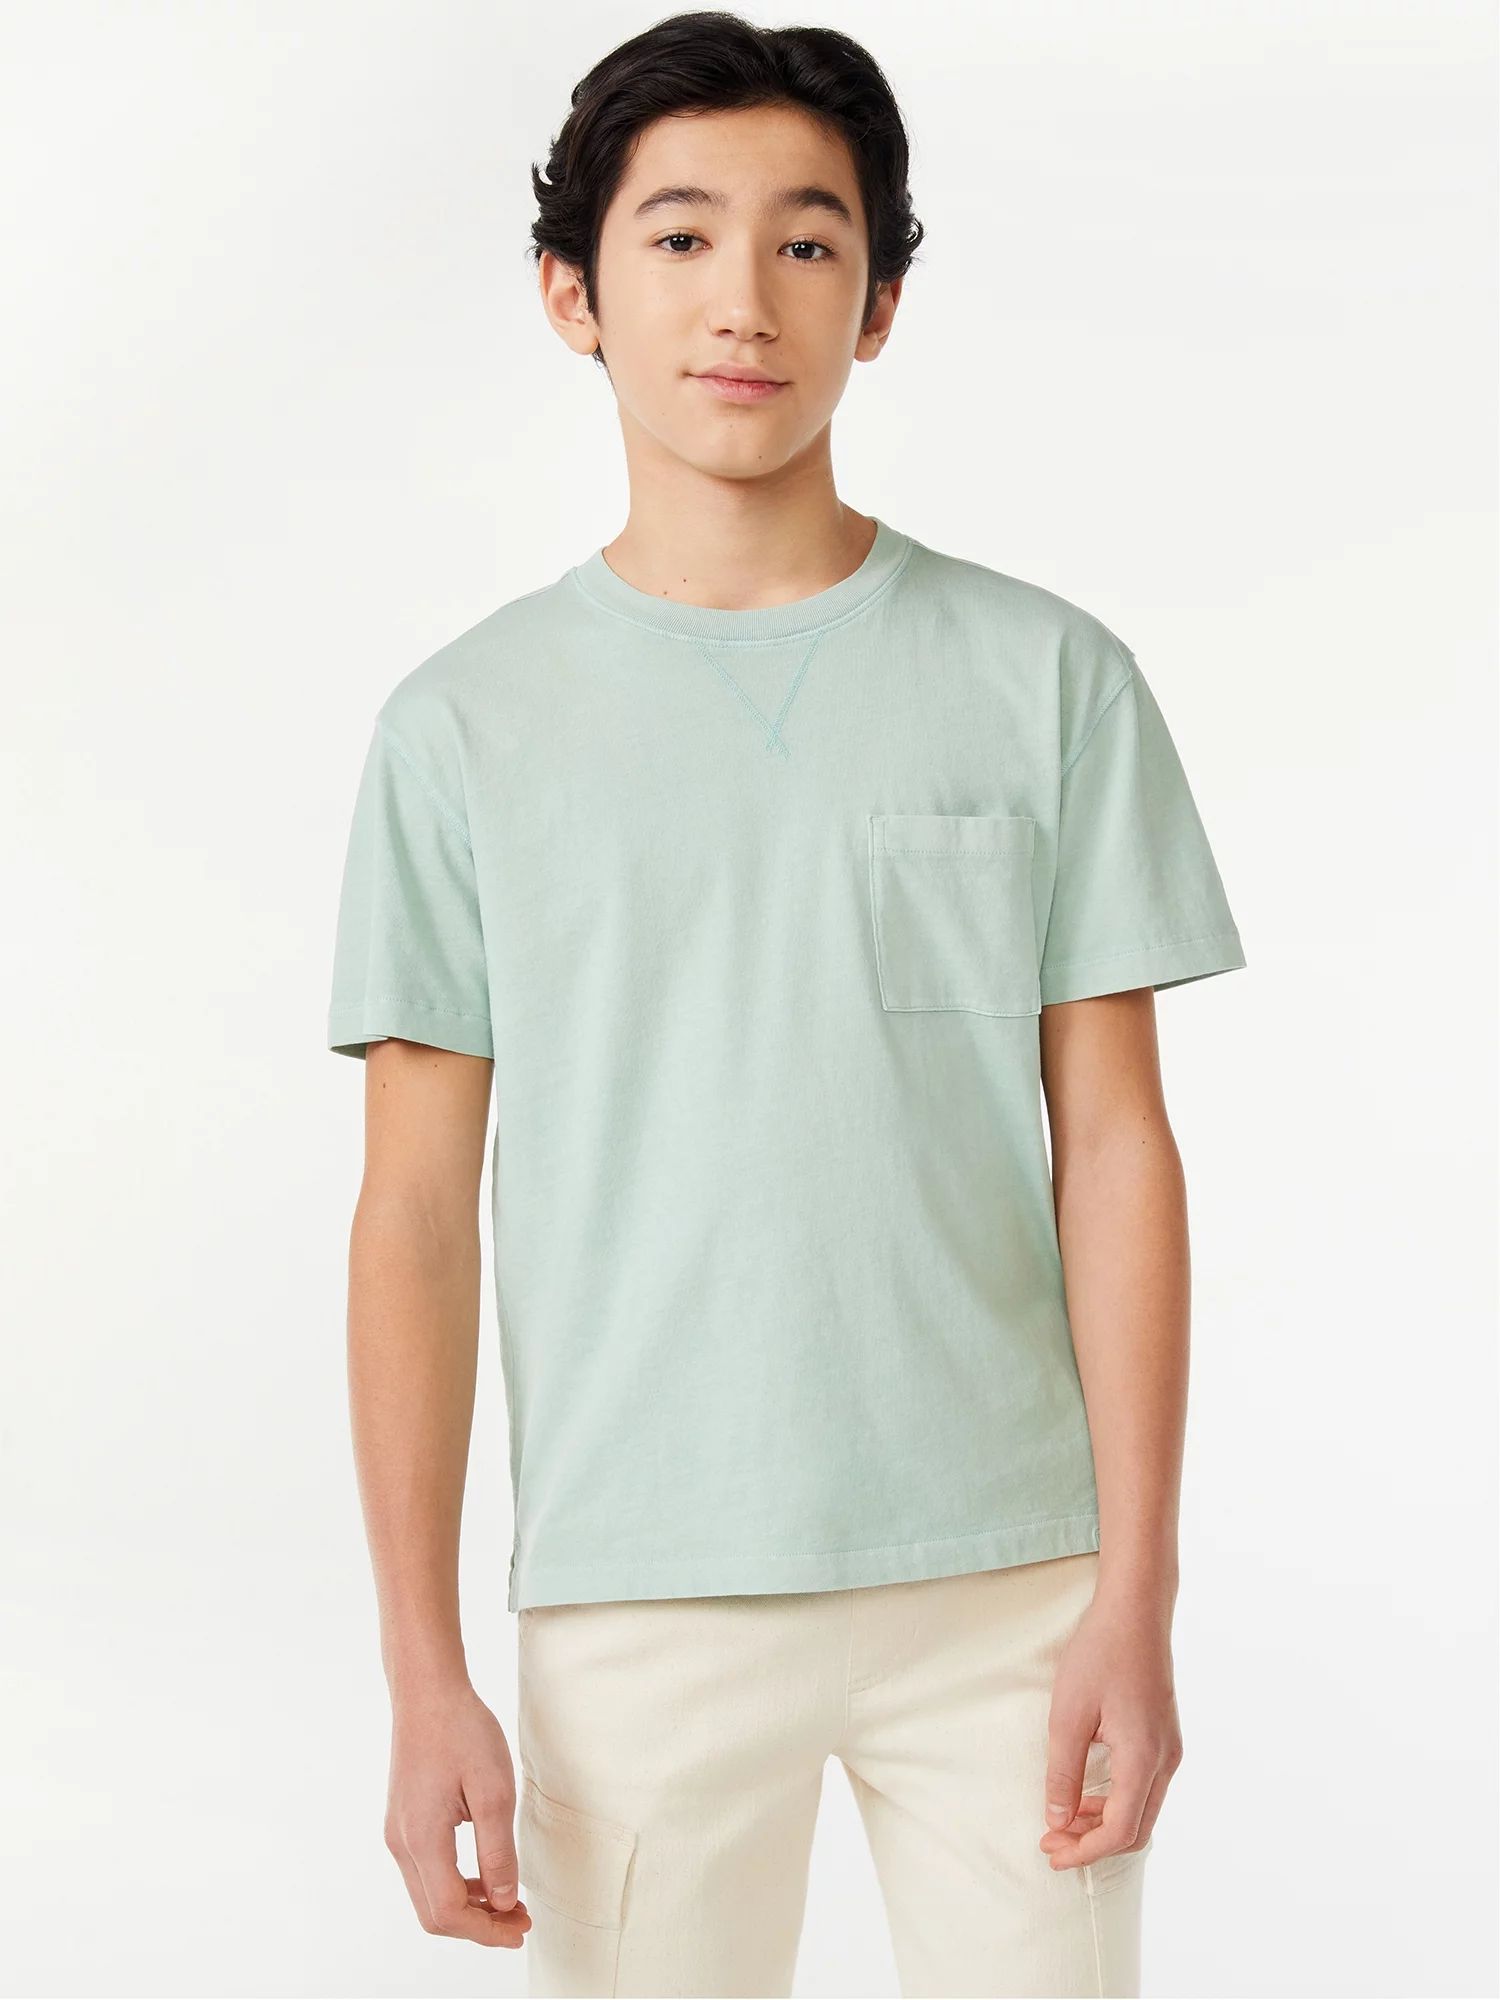 Free Assembly Boys Mineral Dyed Pocket Tee, Sizes 4-18 | Walmart (US)